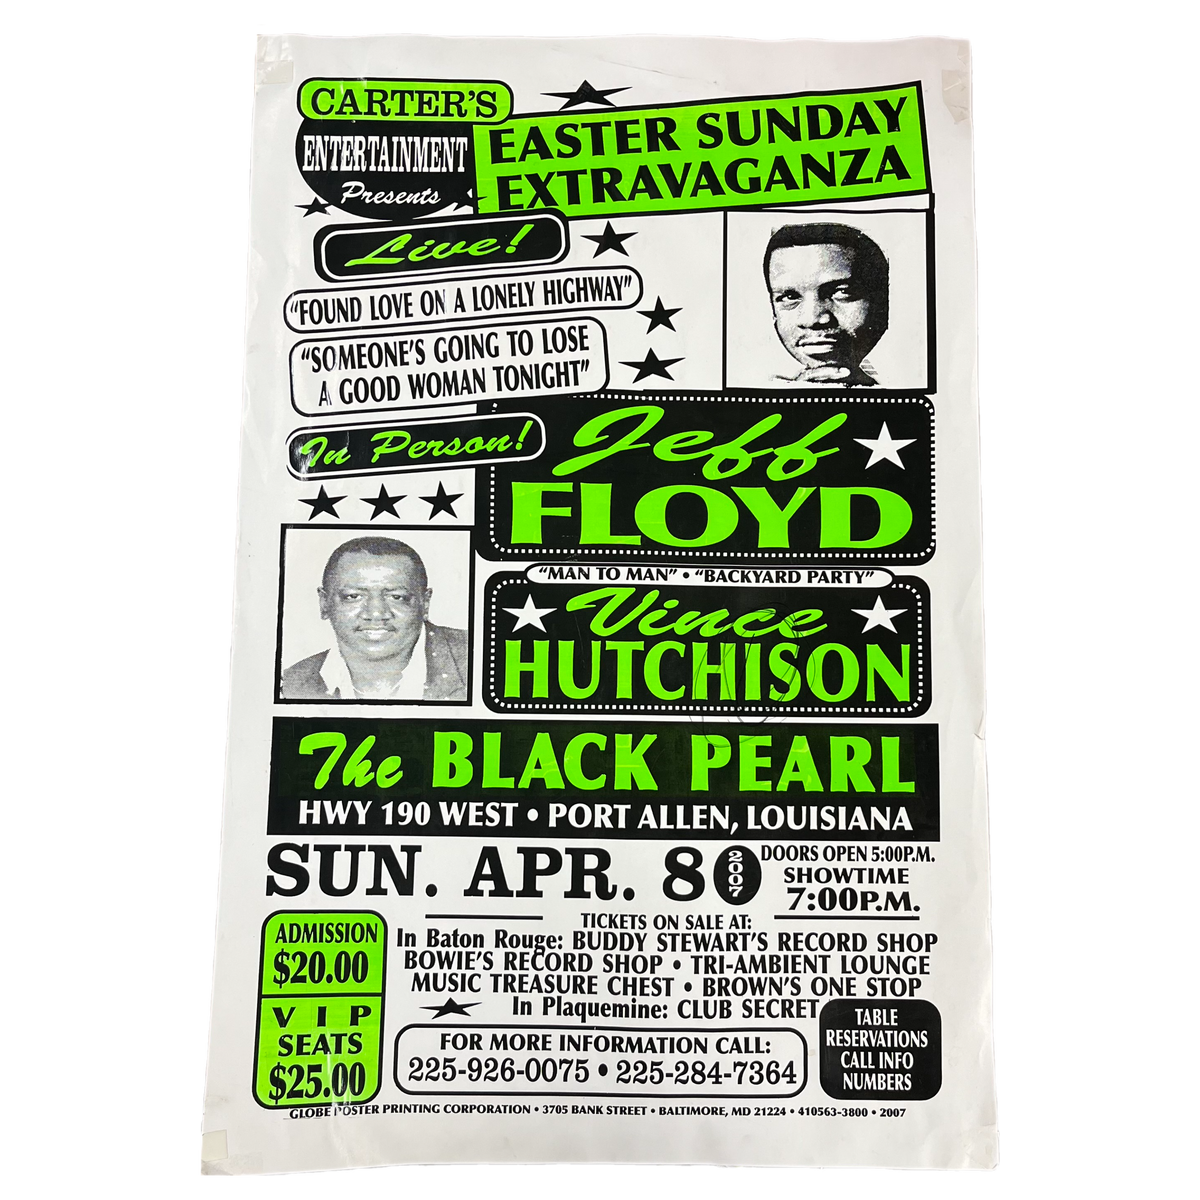 Vintage Easter Sunday Extravaganza Jeff Floyd Vince Hutchison The Black Pearl &quot;Globe Poster Printing Corp&quot; Show Poster